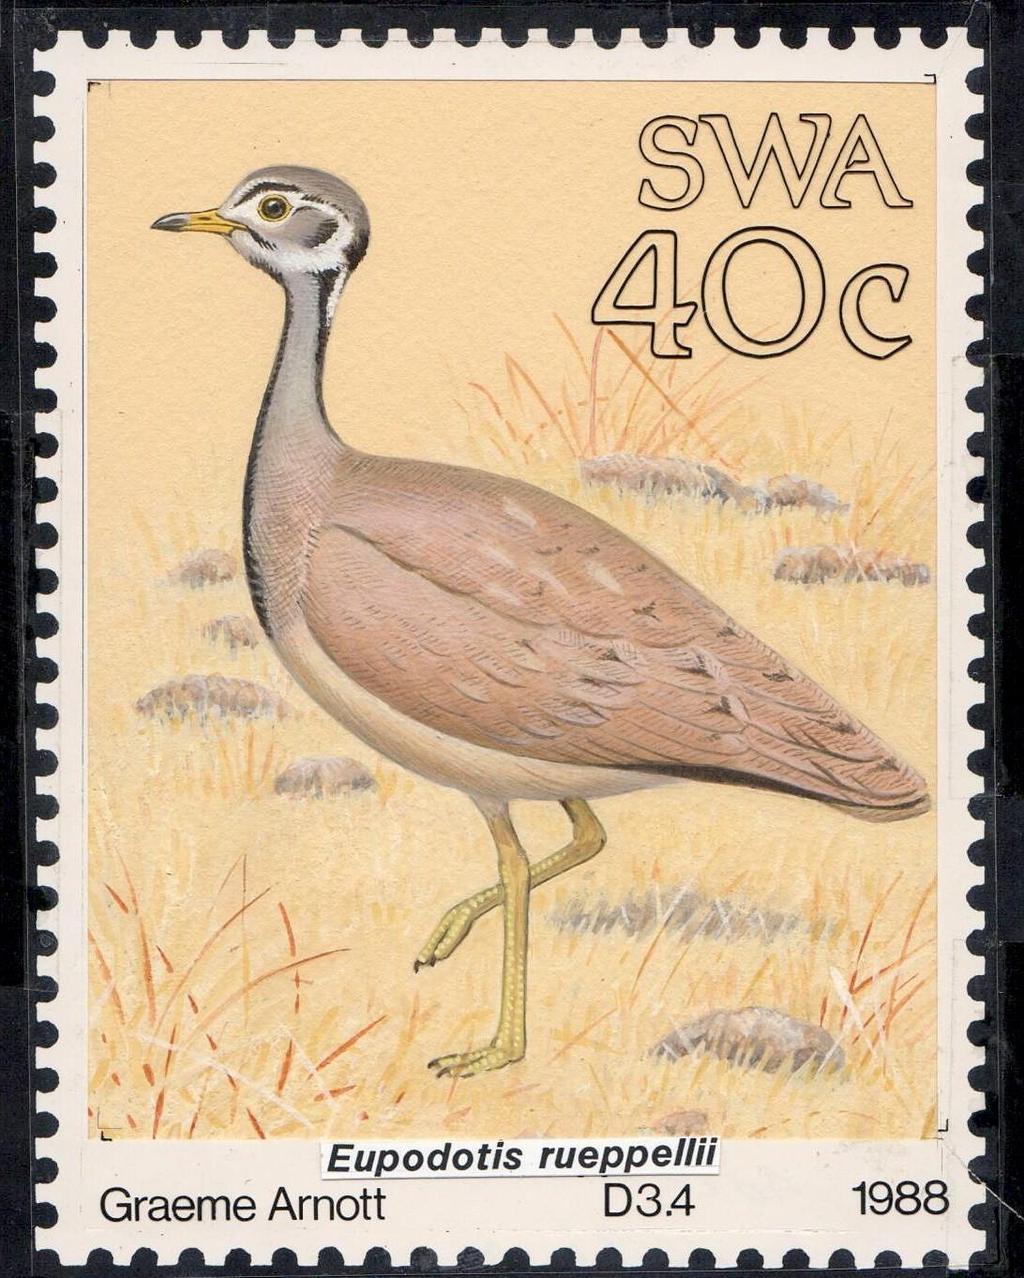 Ruppell s Bustard (47-15) by